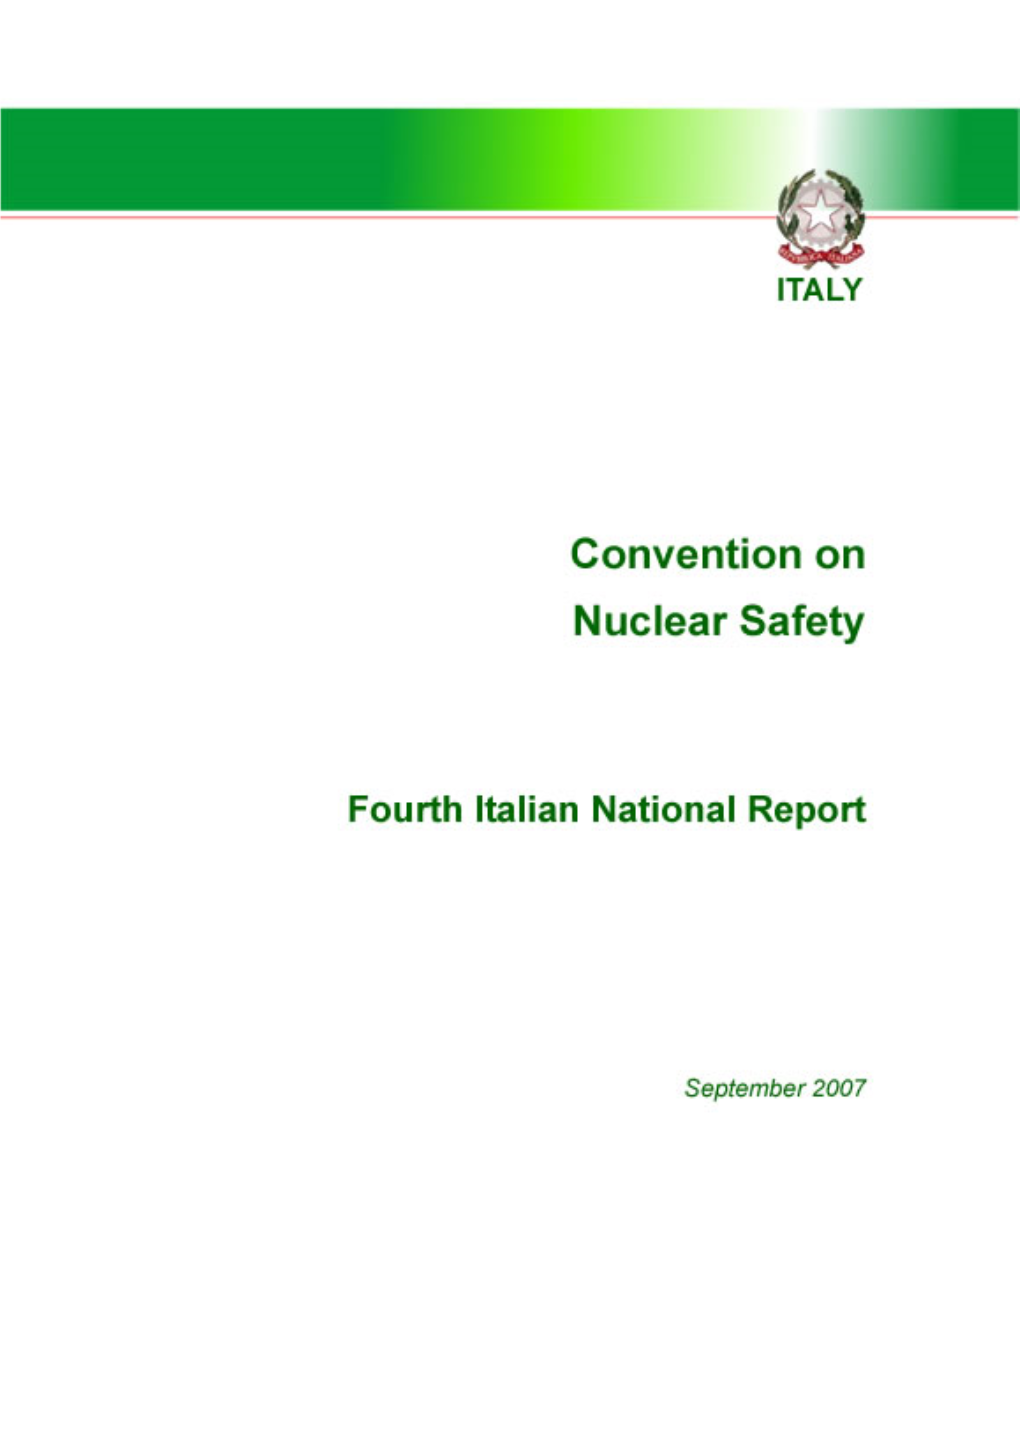 Italian Report Issued in Compliance with Article 5 of the Convention